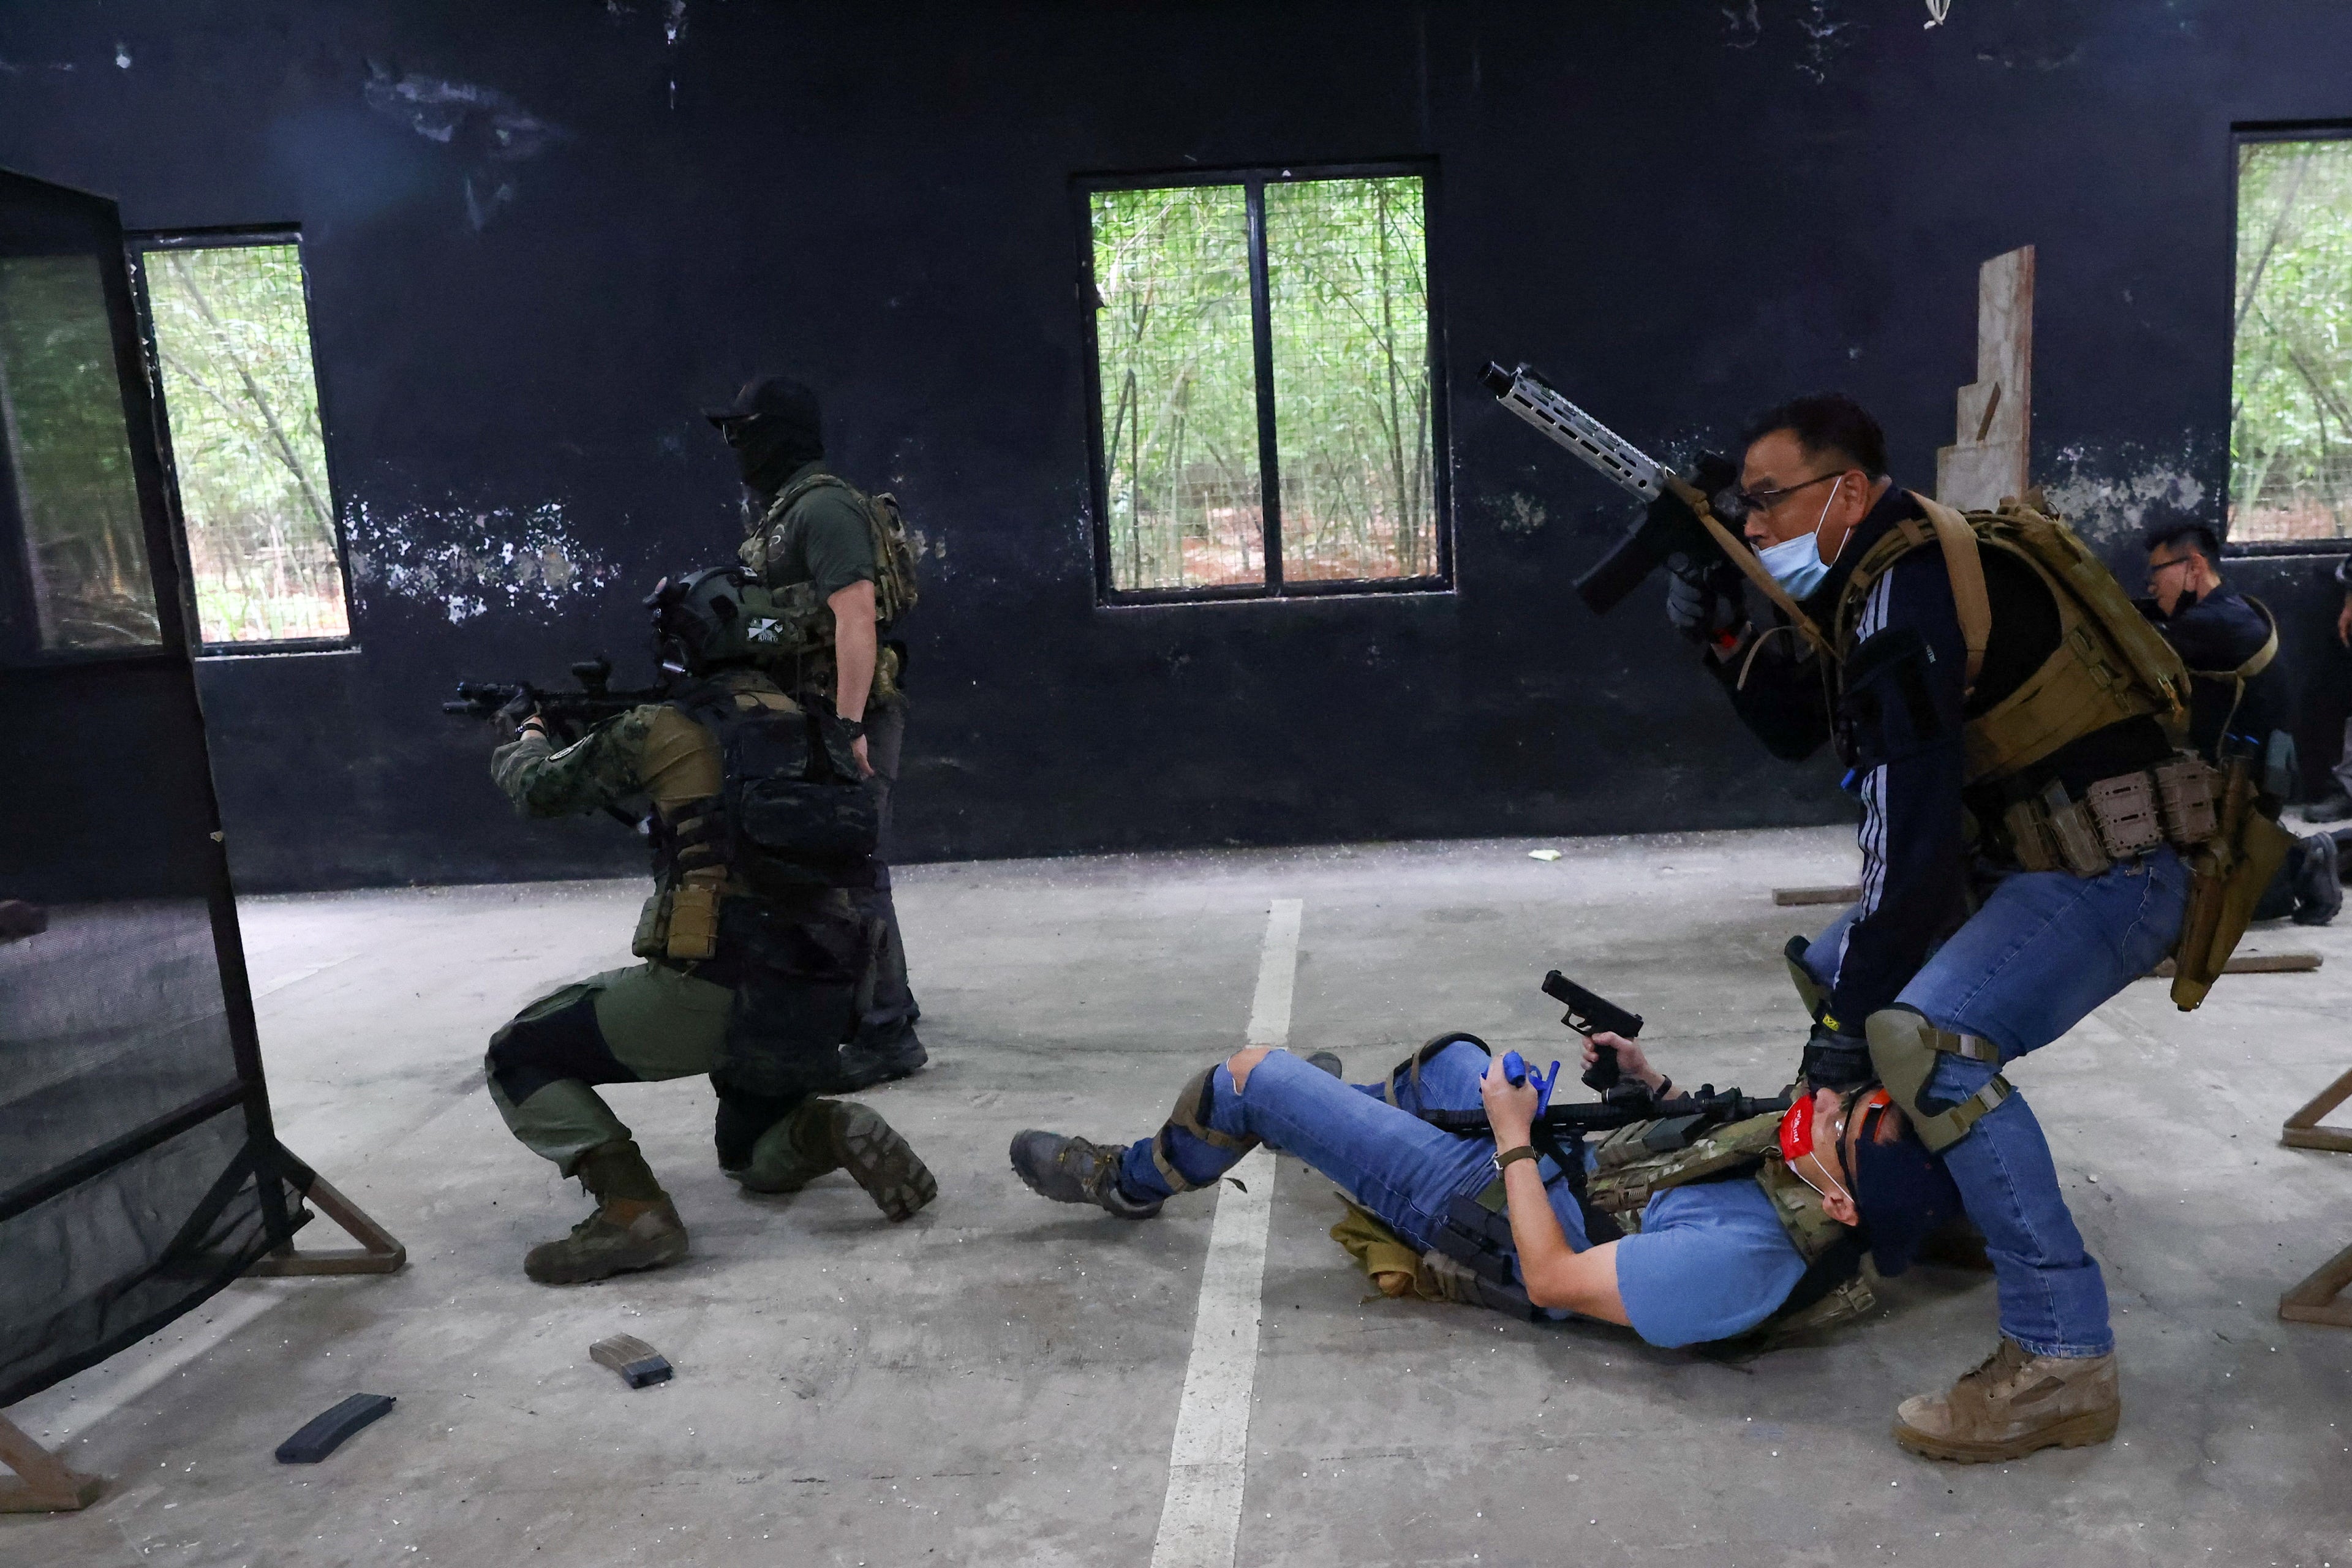 Trainees work on a simulated hostage rescue mission during an airsoft gun training lesson